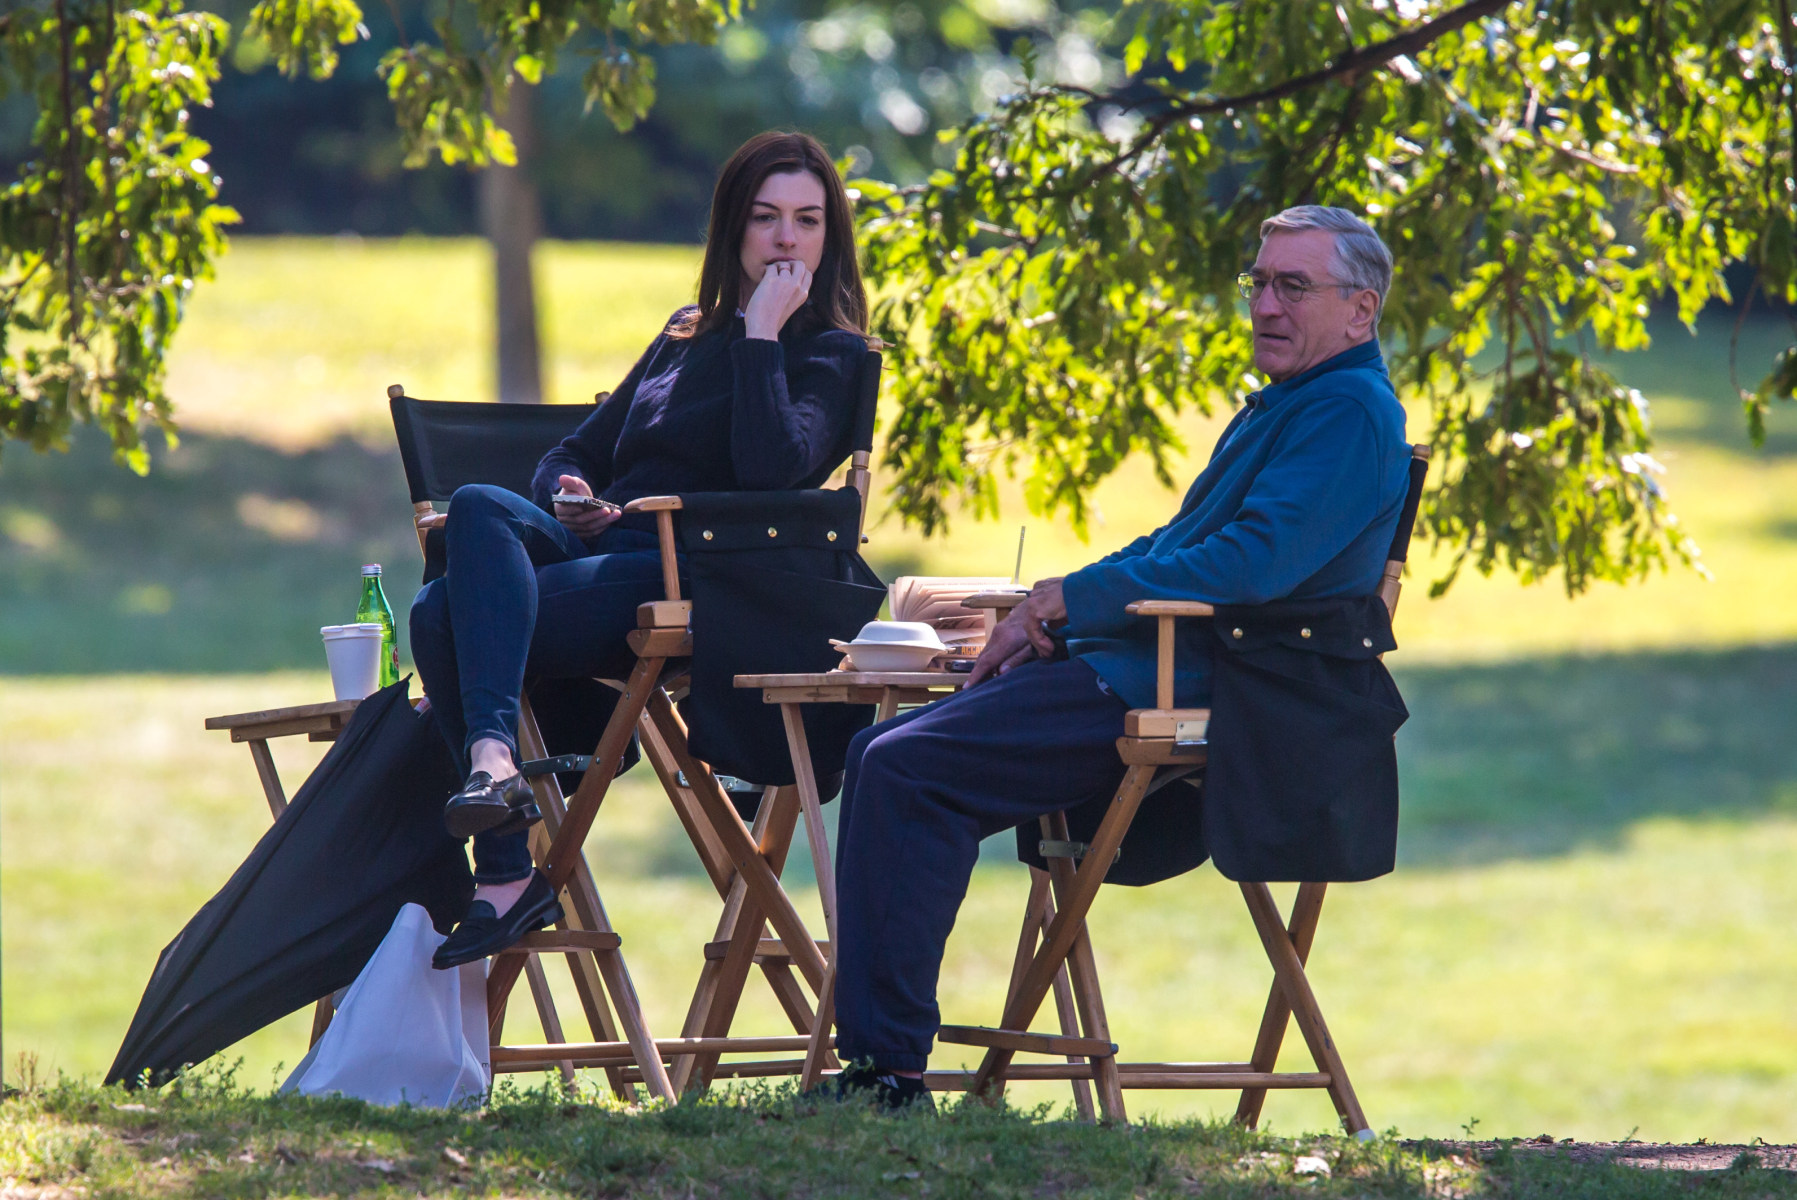 From the Film The Intern (2015) Behind the Scenes